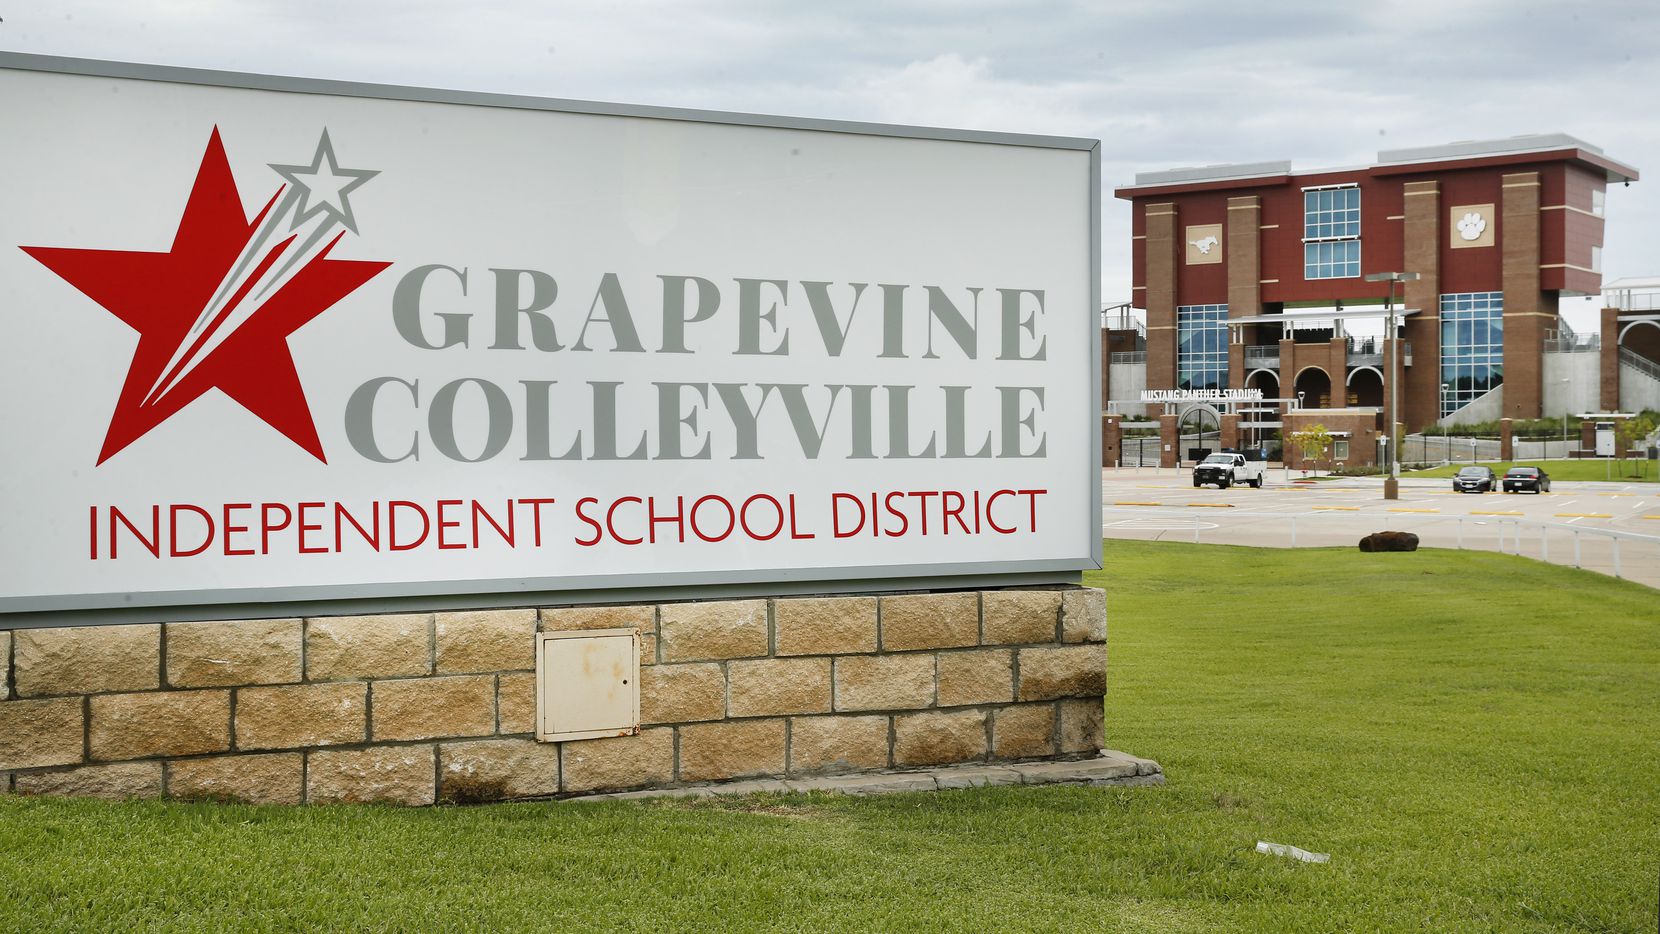 Grapevine-Colleyville ISD will offer virtual learning for the first nine weeks of school for grades pre-k through fifth. (Tom Fox/The Dallas Morning News)